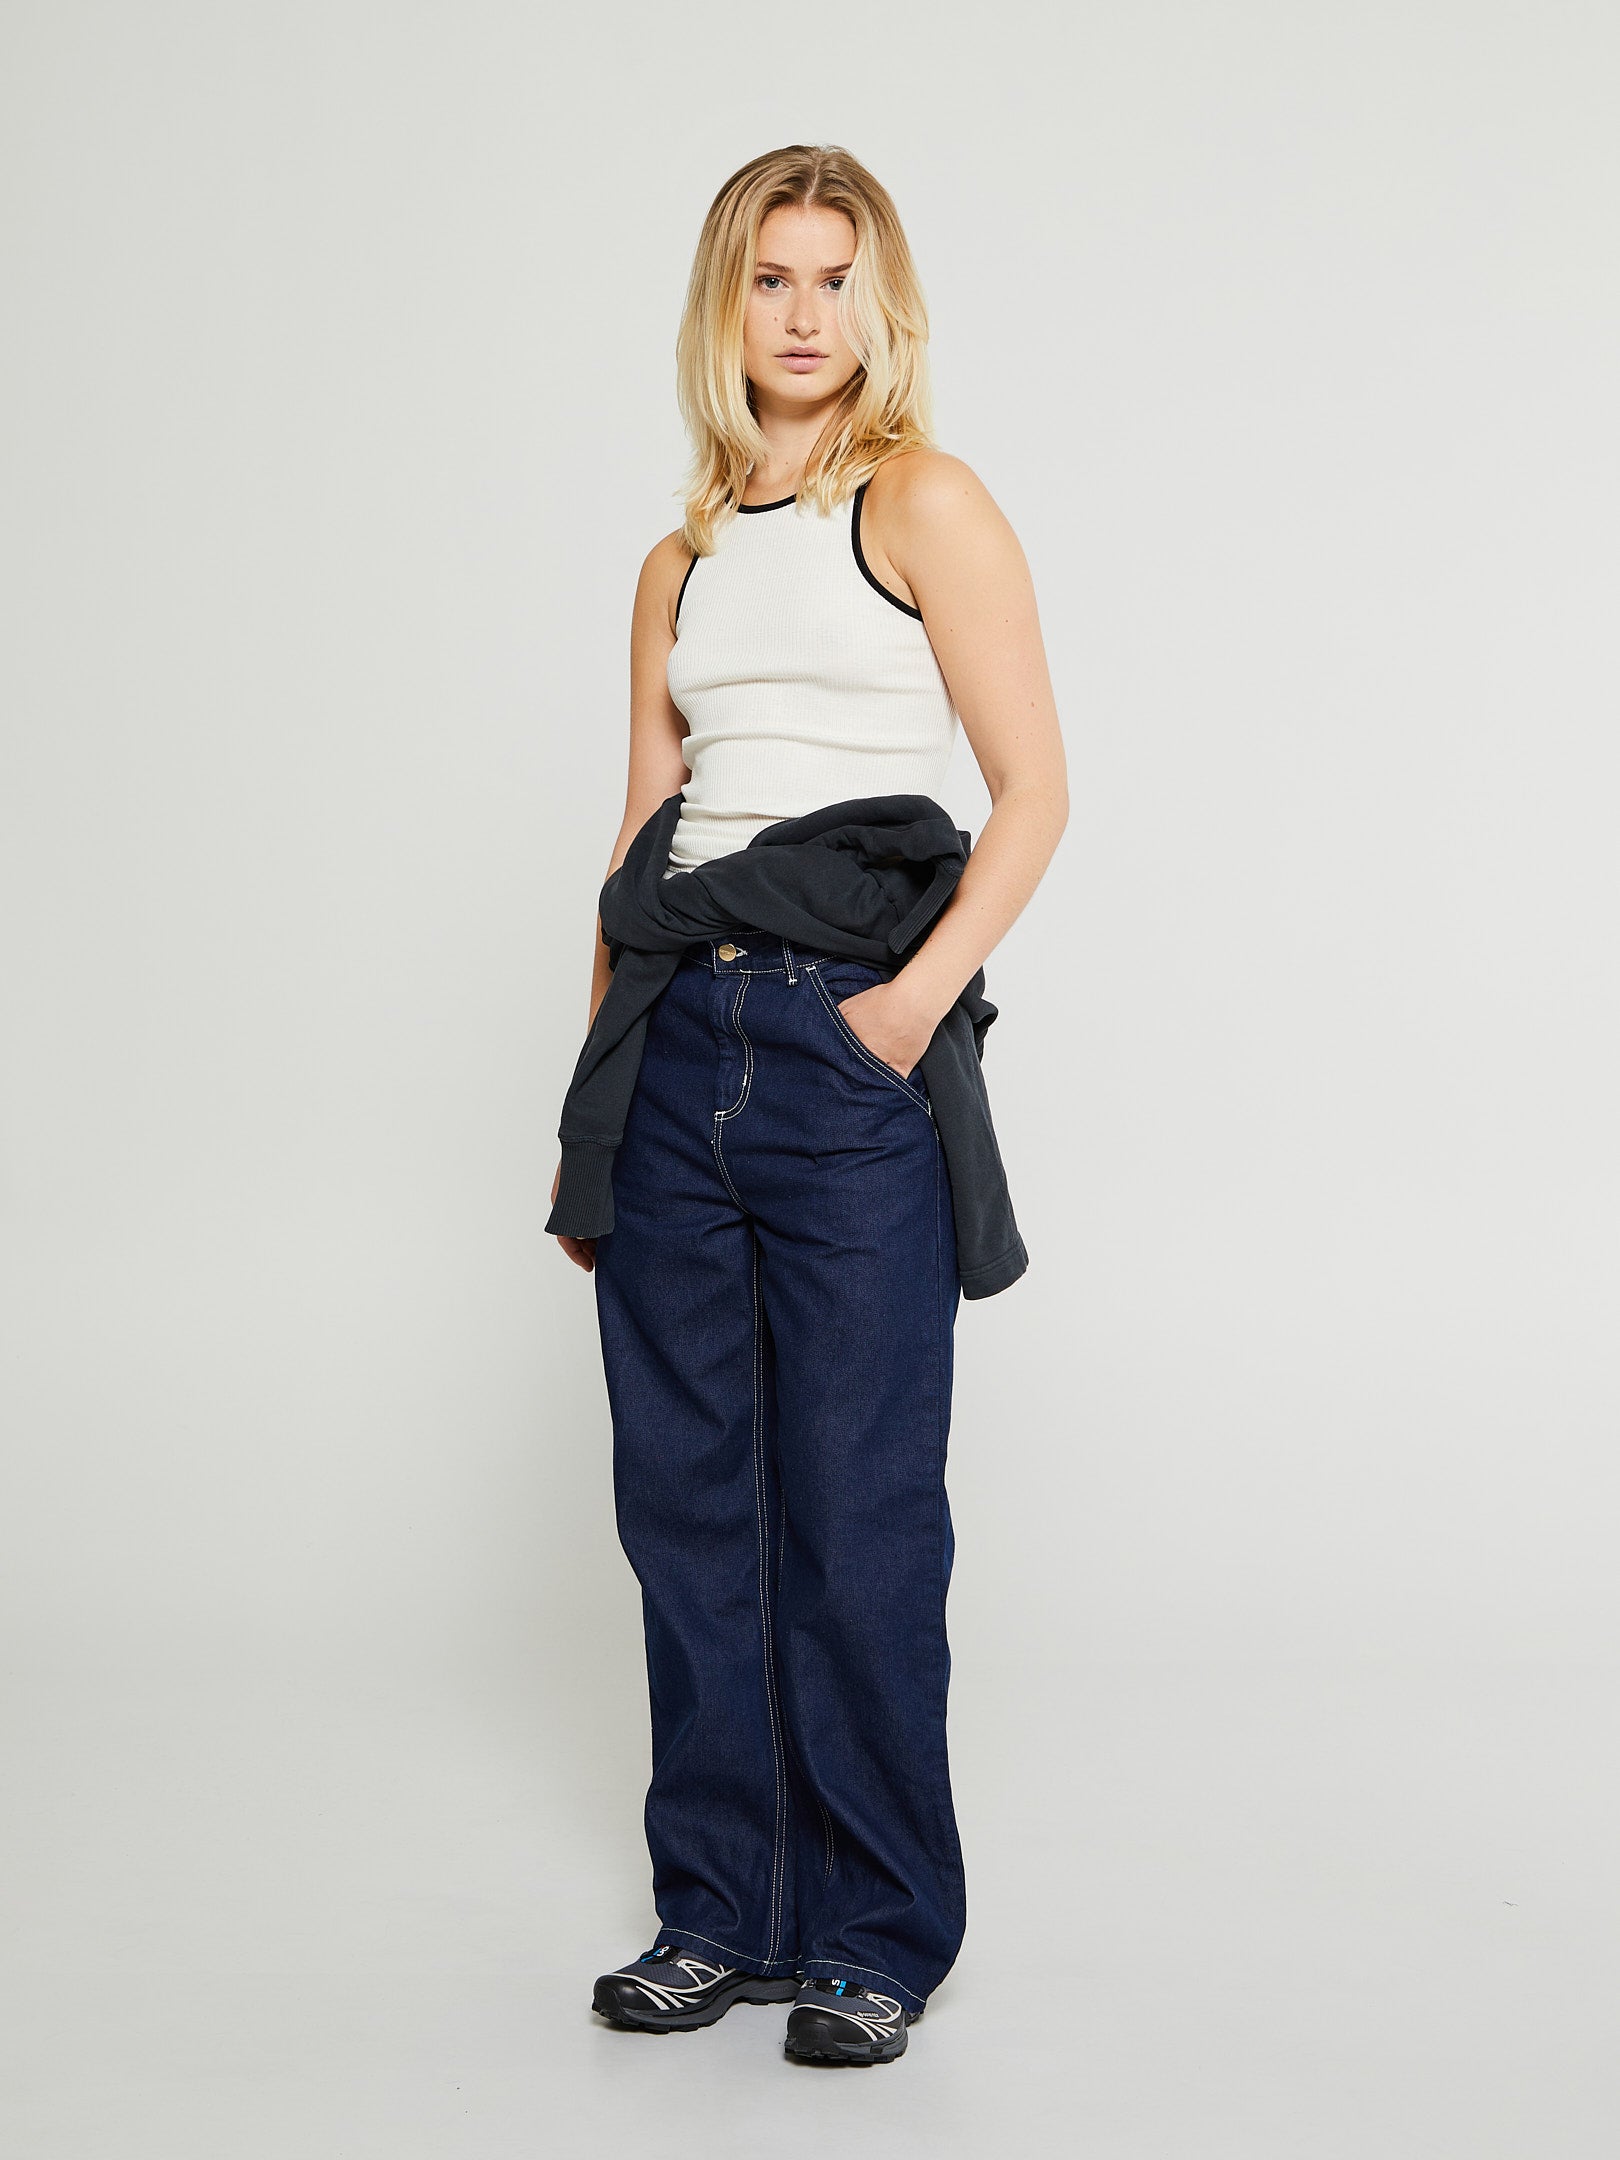 Women's Simple Pant in Blue One Wash